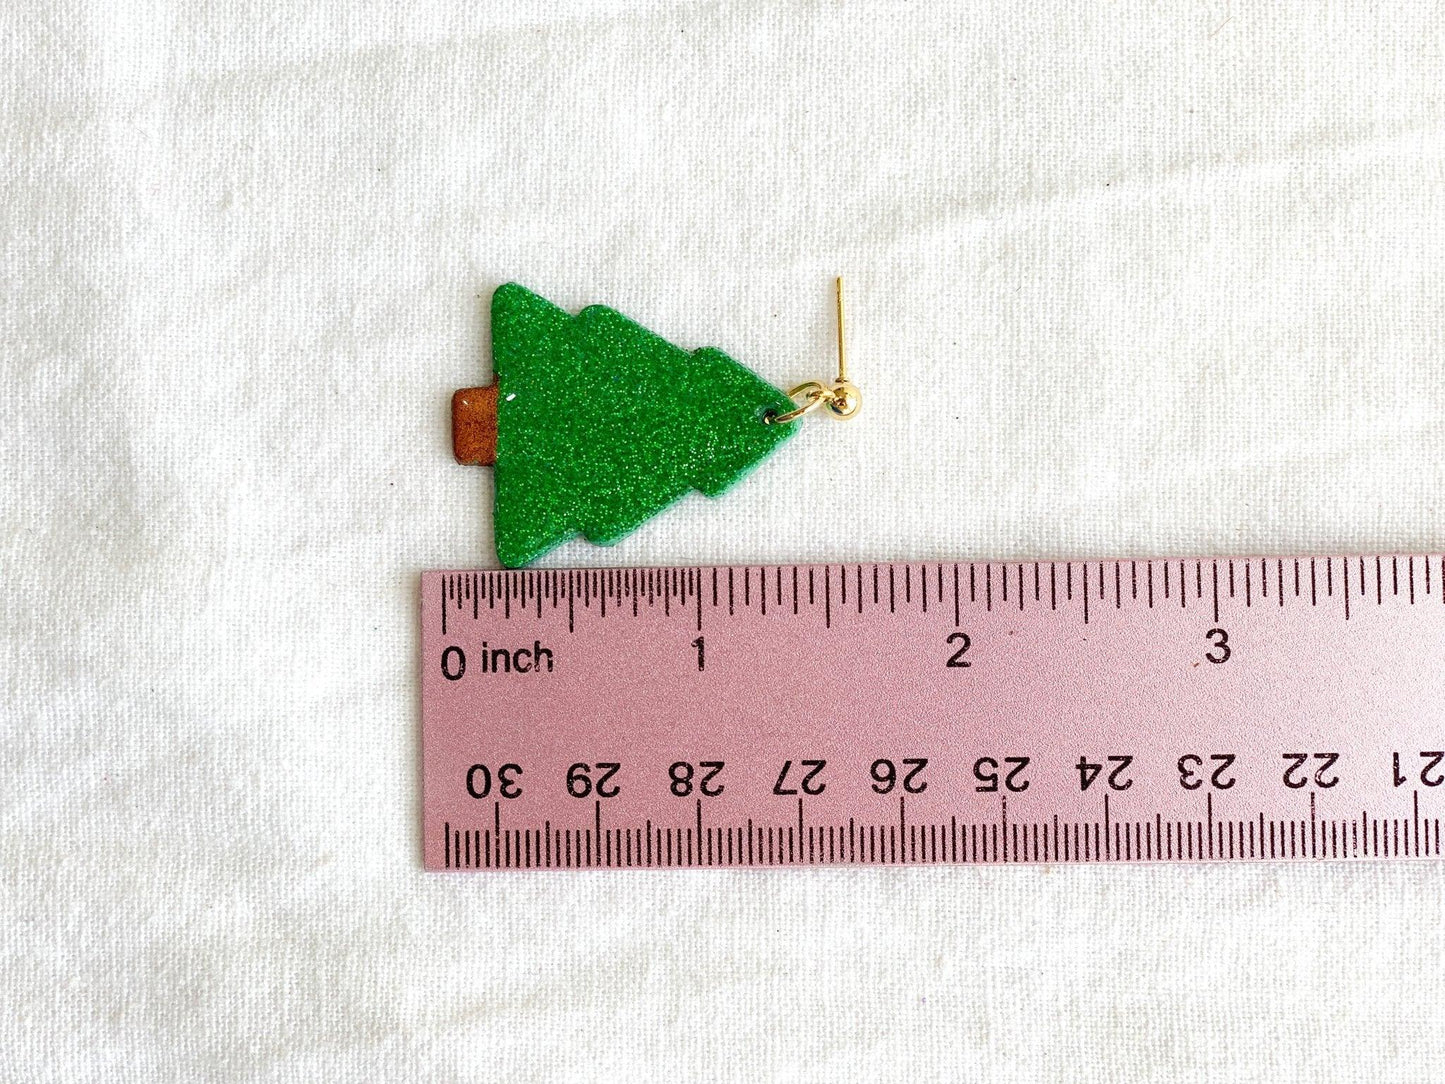 handmade earrings that are sparkly green christmas trees attached to gold ball posts next to pink ruler on white cloth